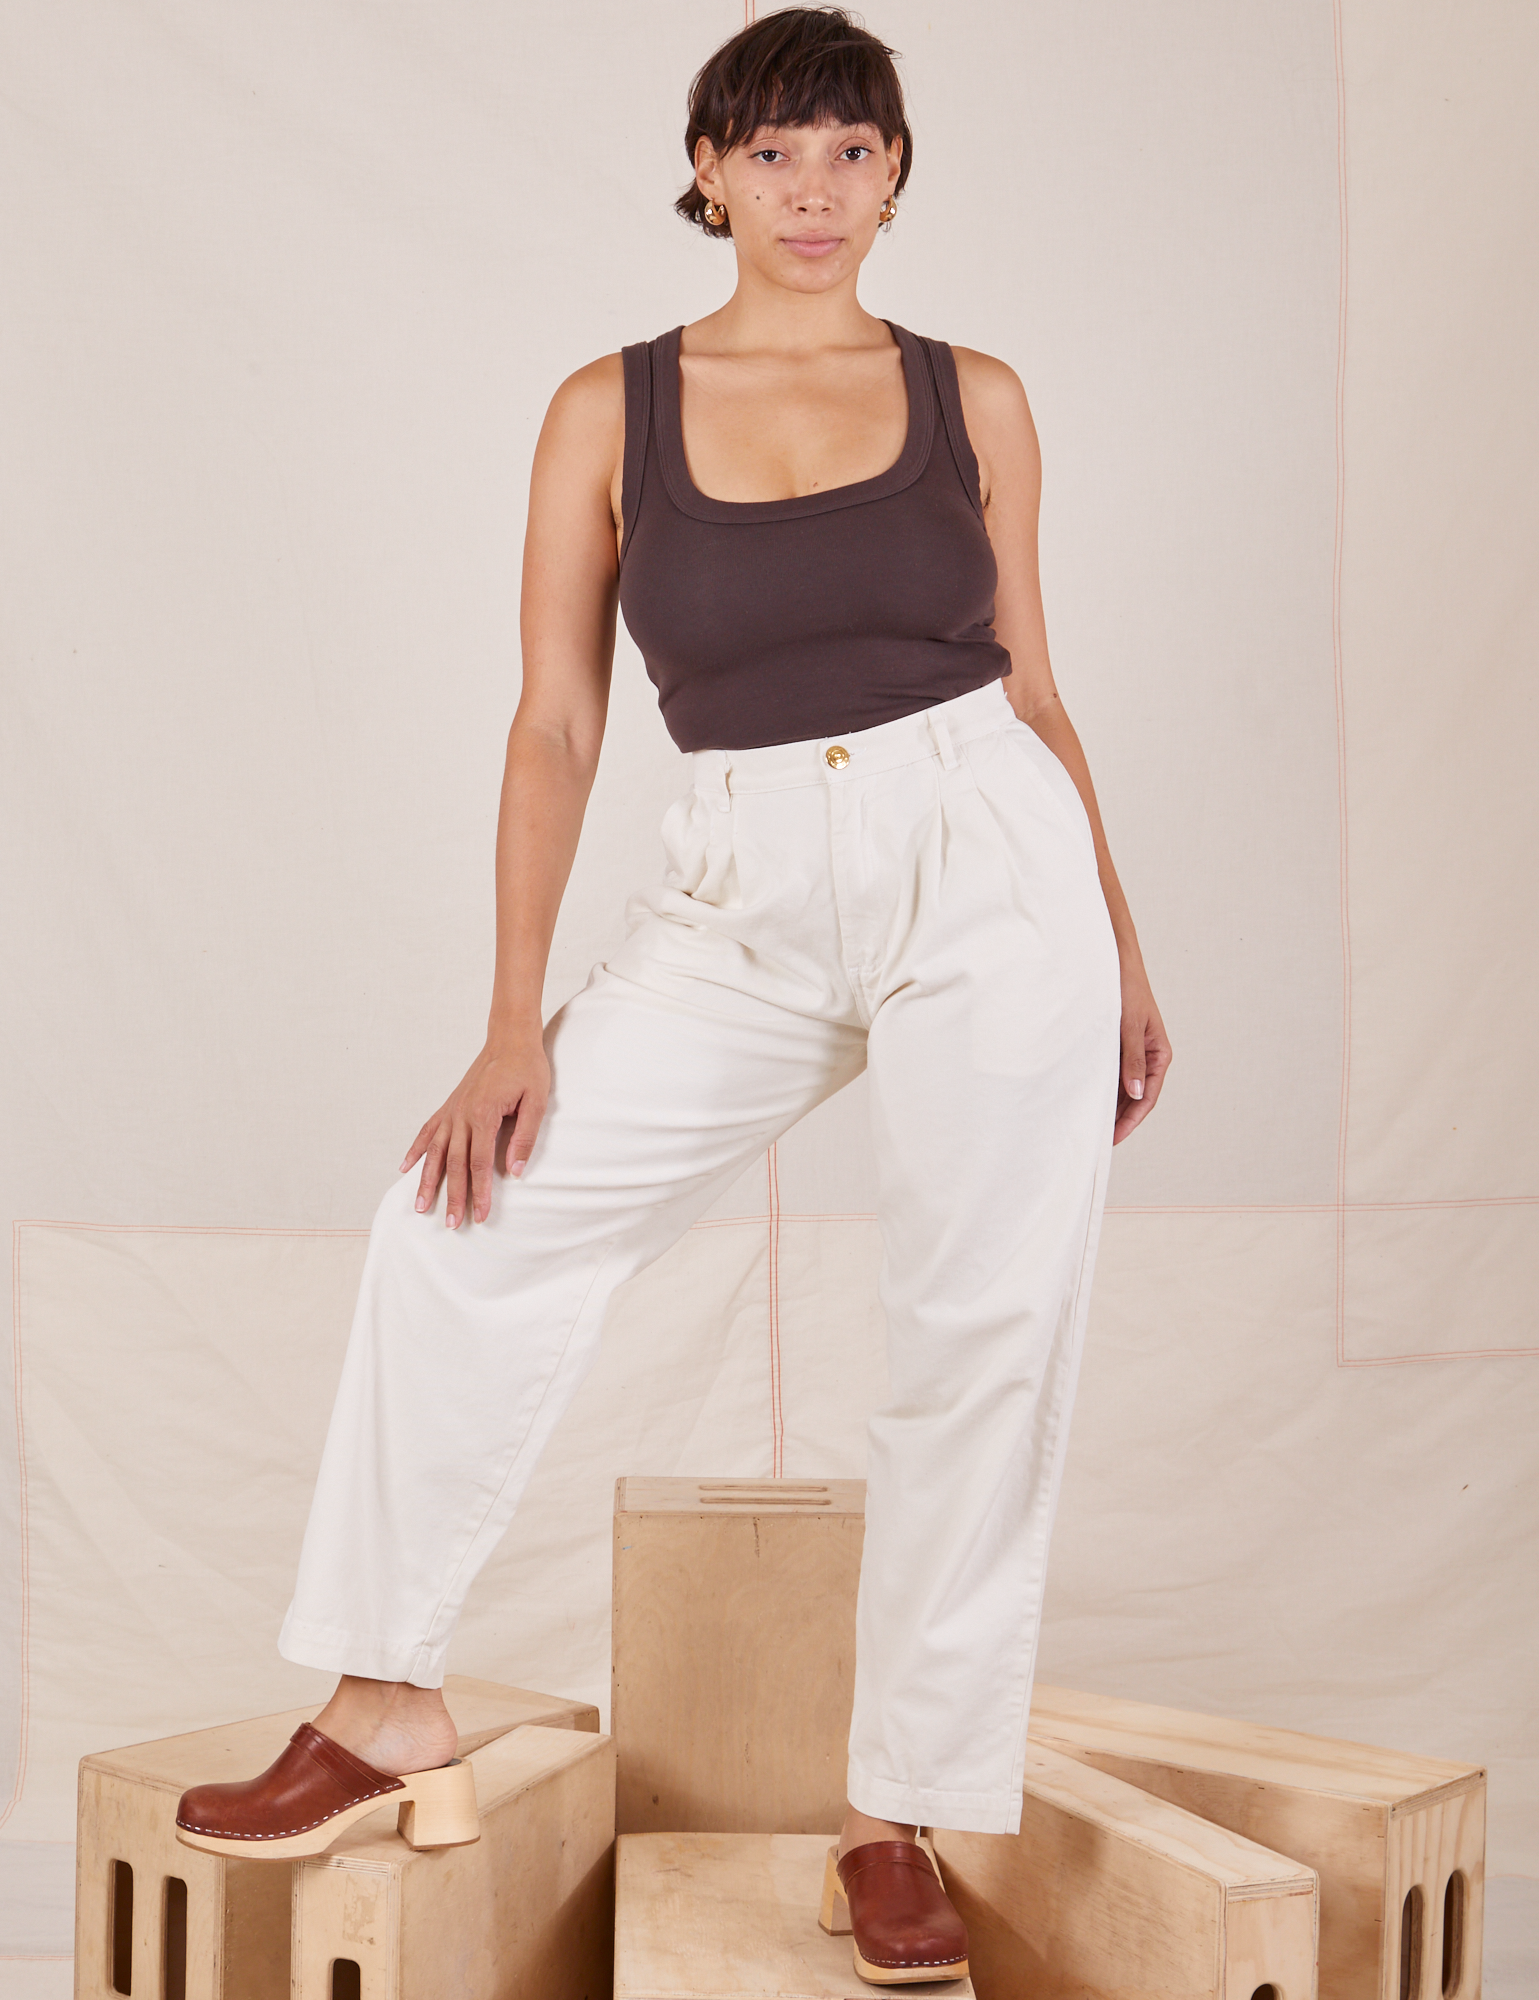 Tiara is 5&#39;4&quot; and wearing S Heavyweight Trousers in Vintage Tee Off-White paired with espresso brown Cropped Tank Top.